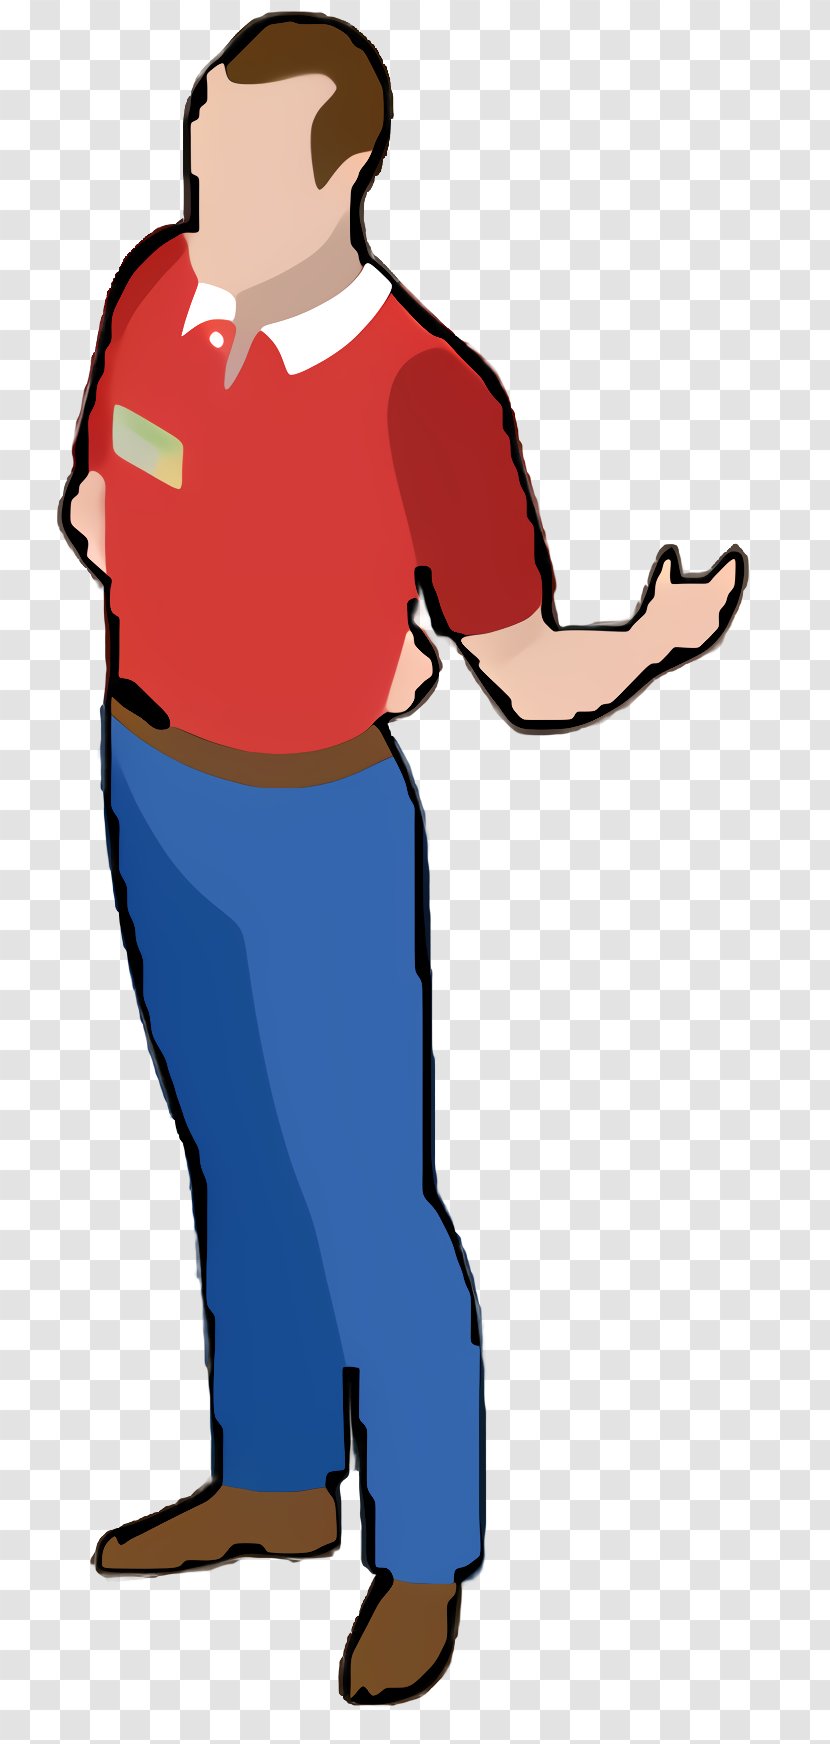 Character Standing - Gesture Transparent PNG